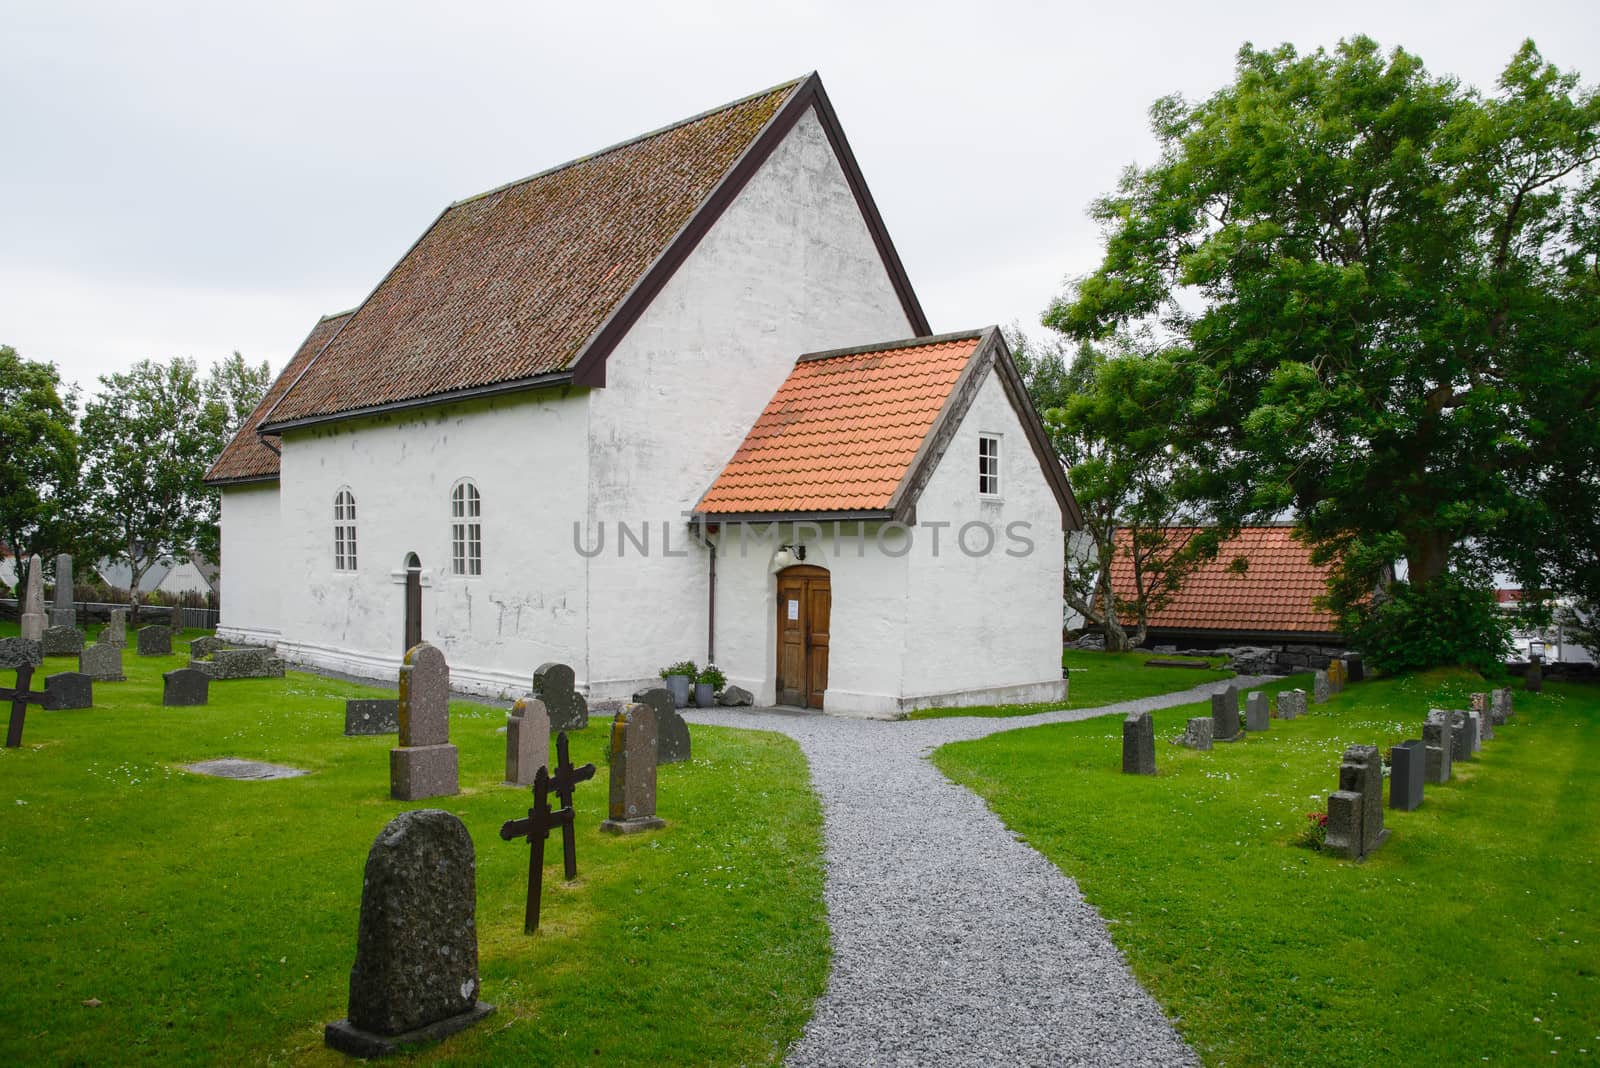 The old medieval church at Giske, Norway